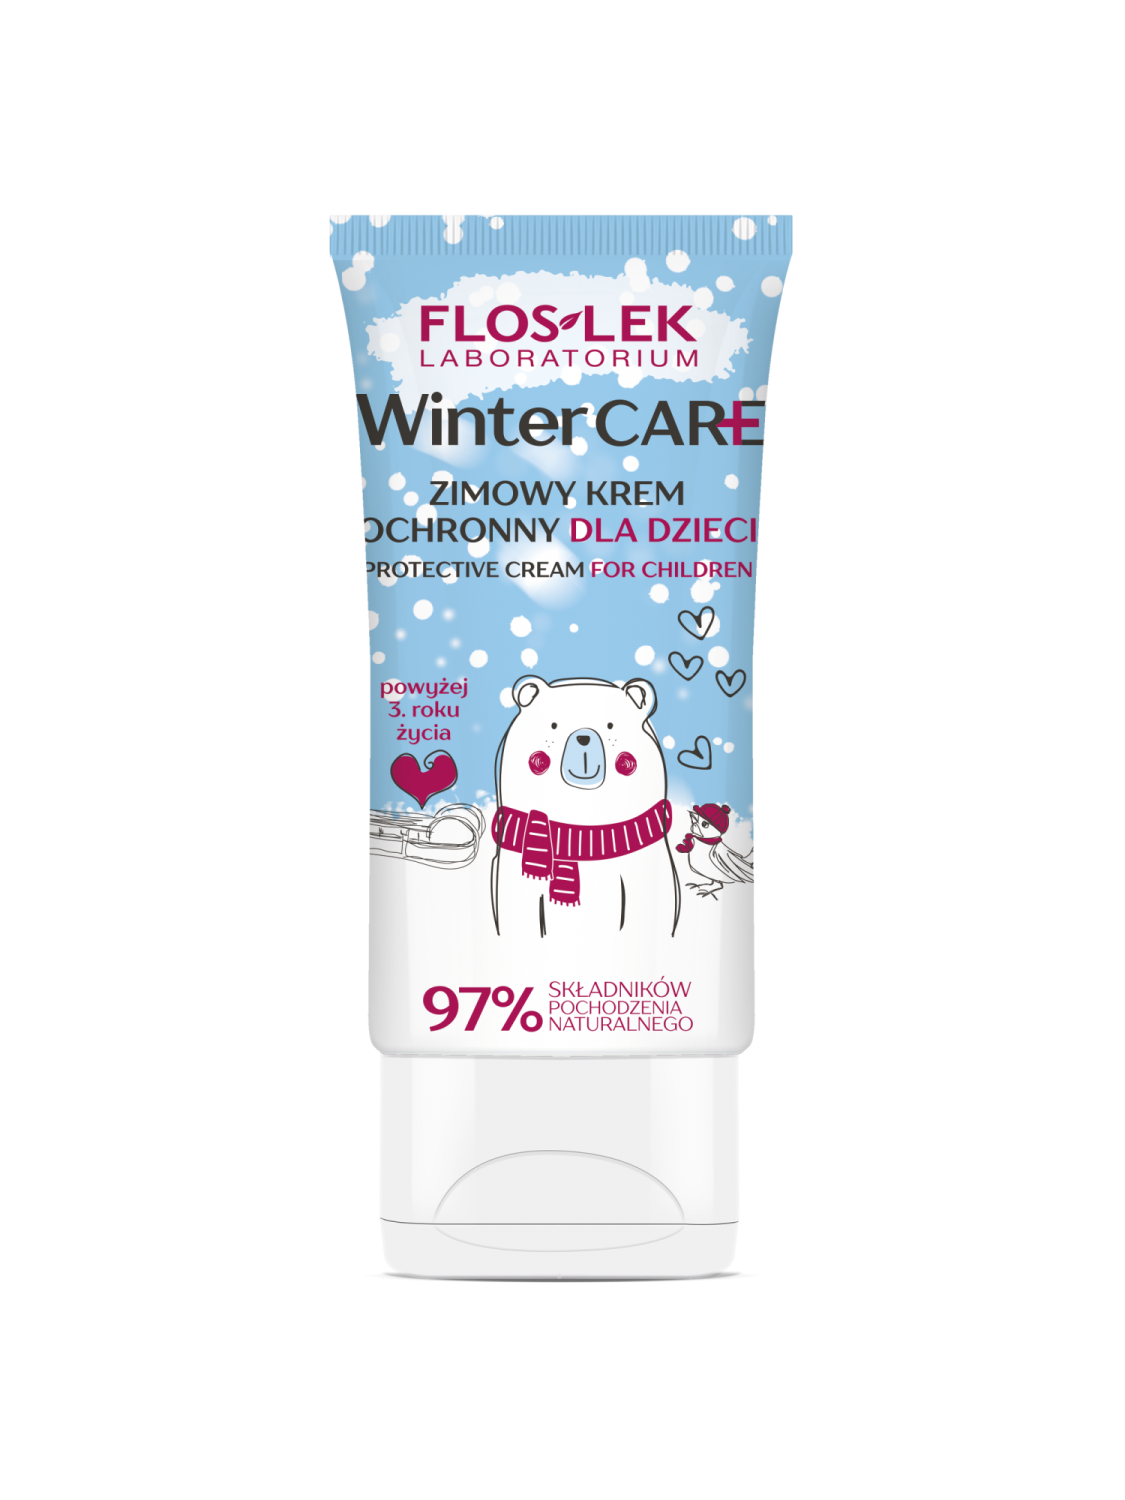 FLOSLEK WINTER CARE Winter protective cream for children 50ml over 3 years old